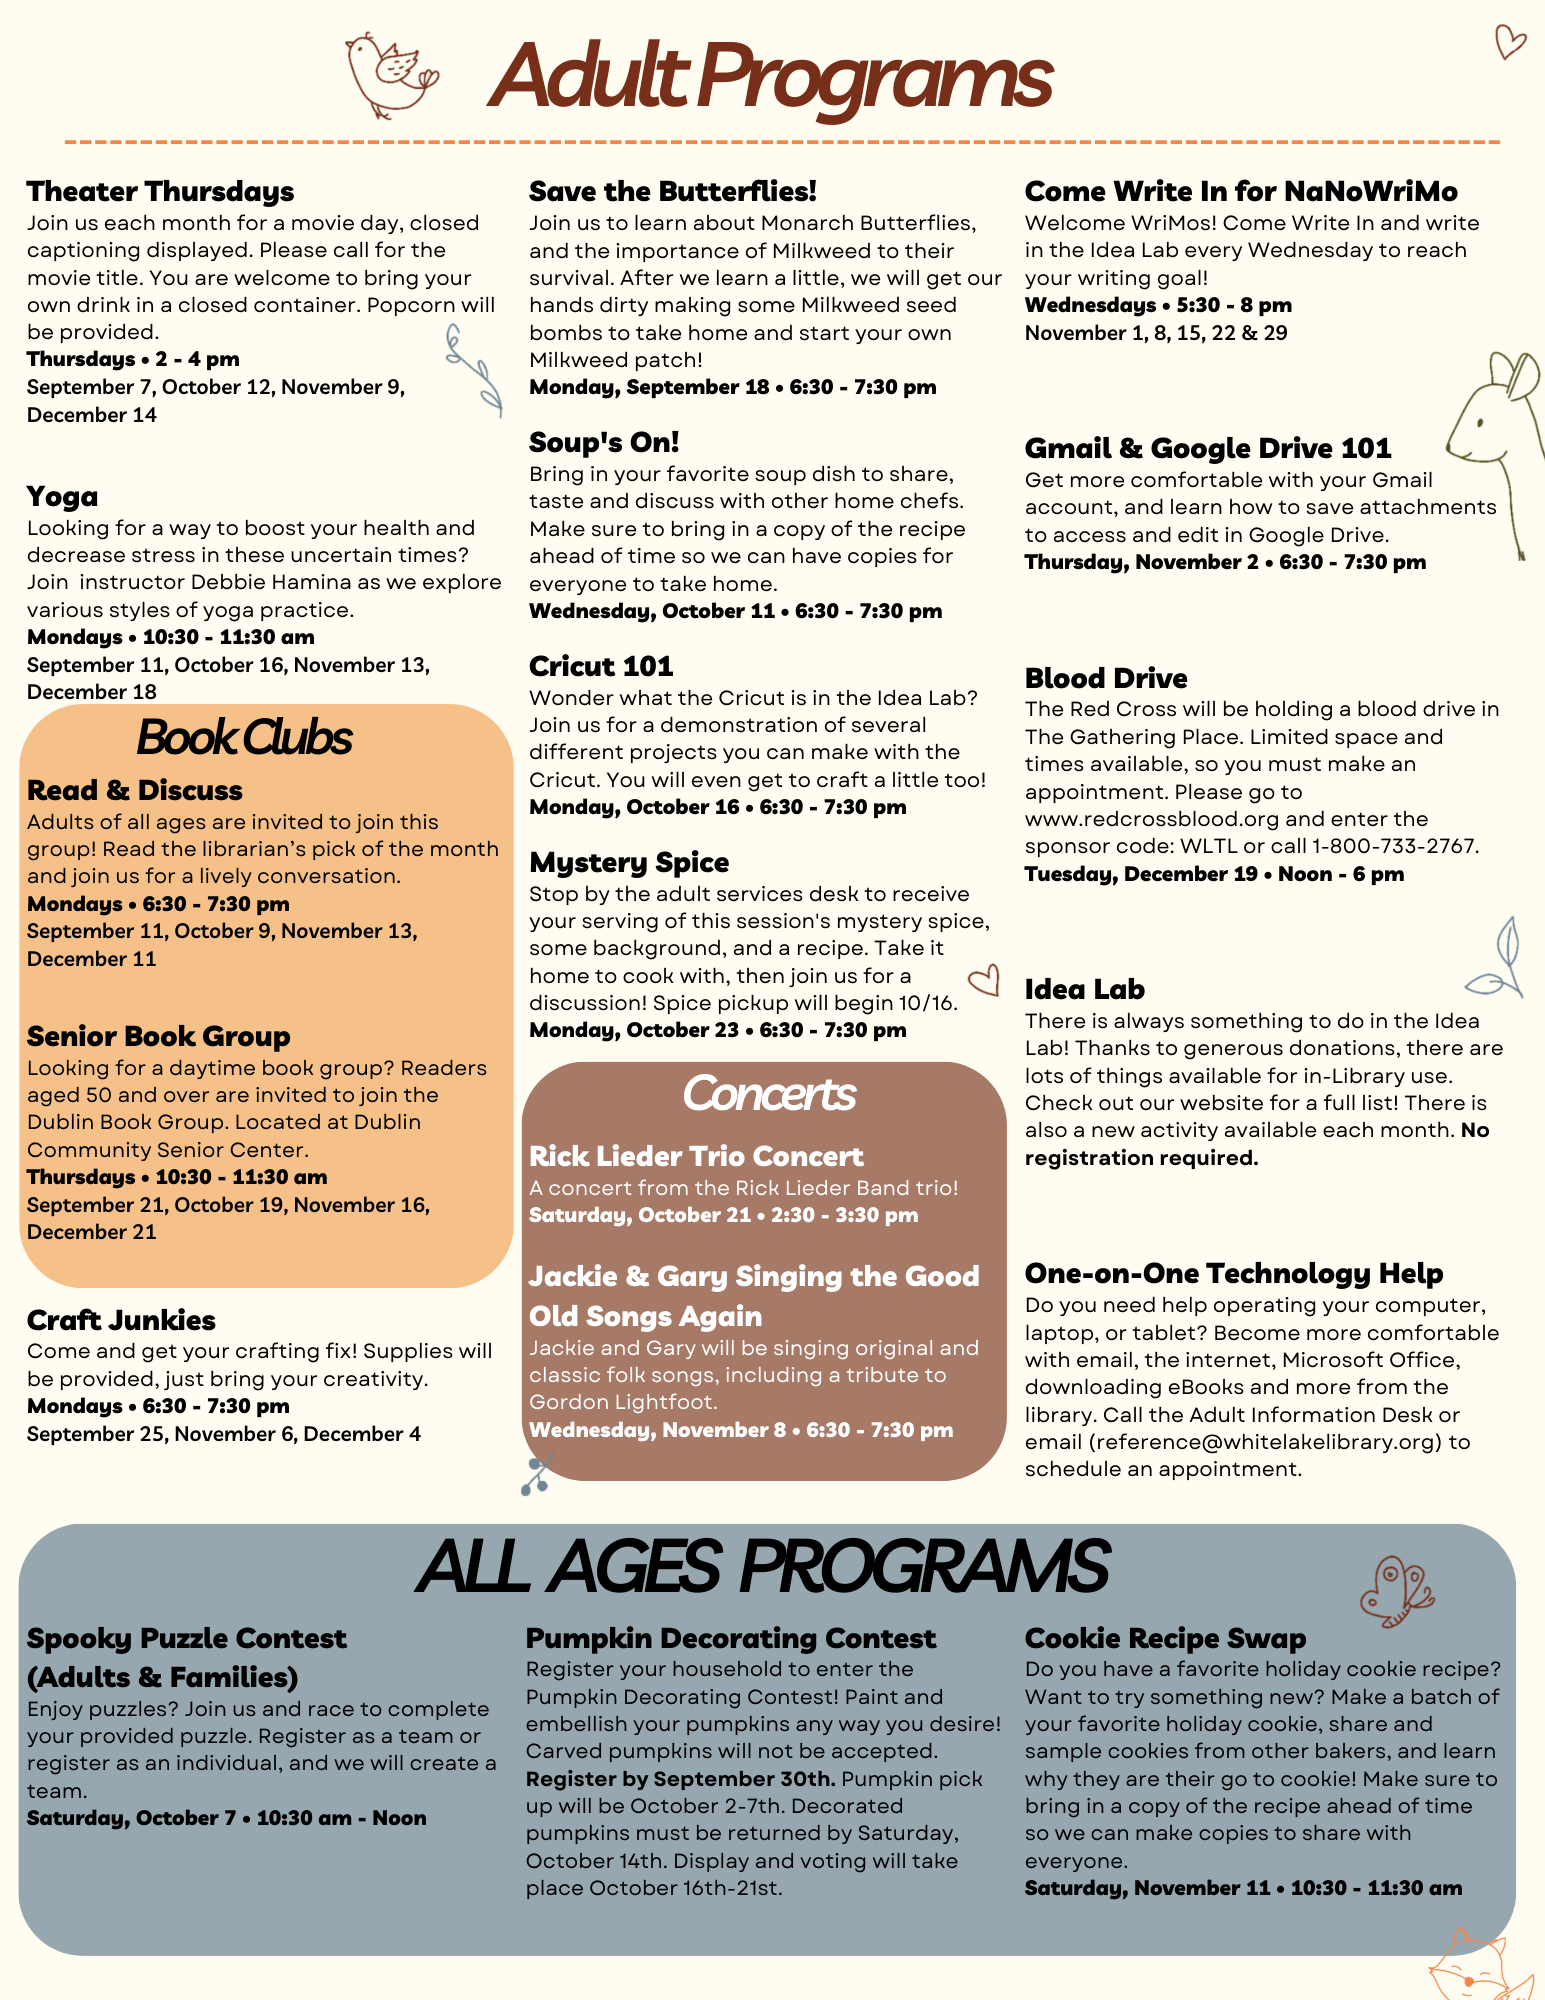 Image of Adult Programs